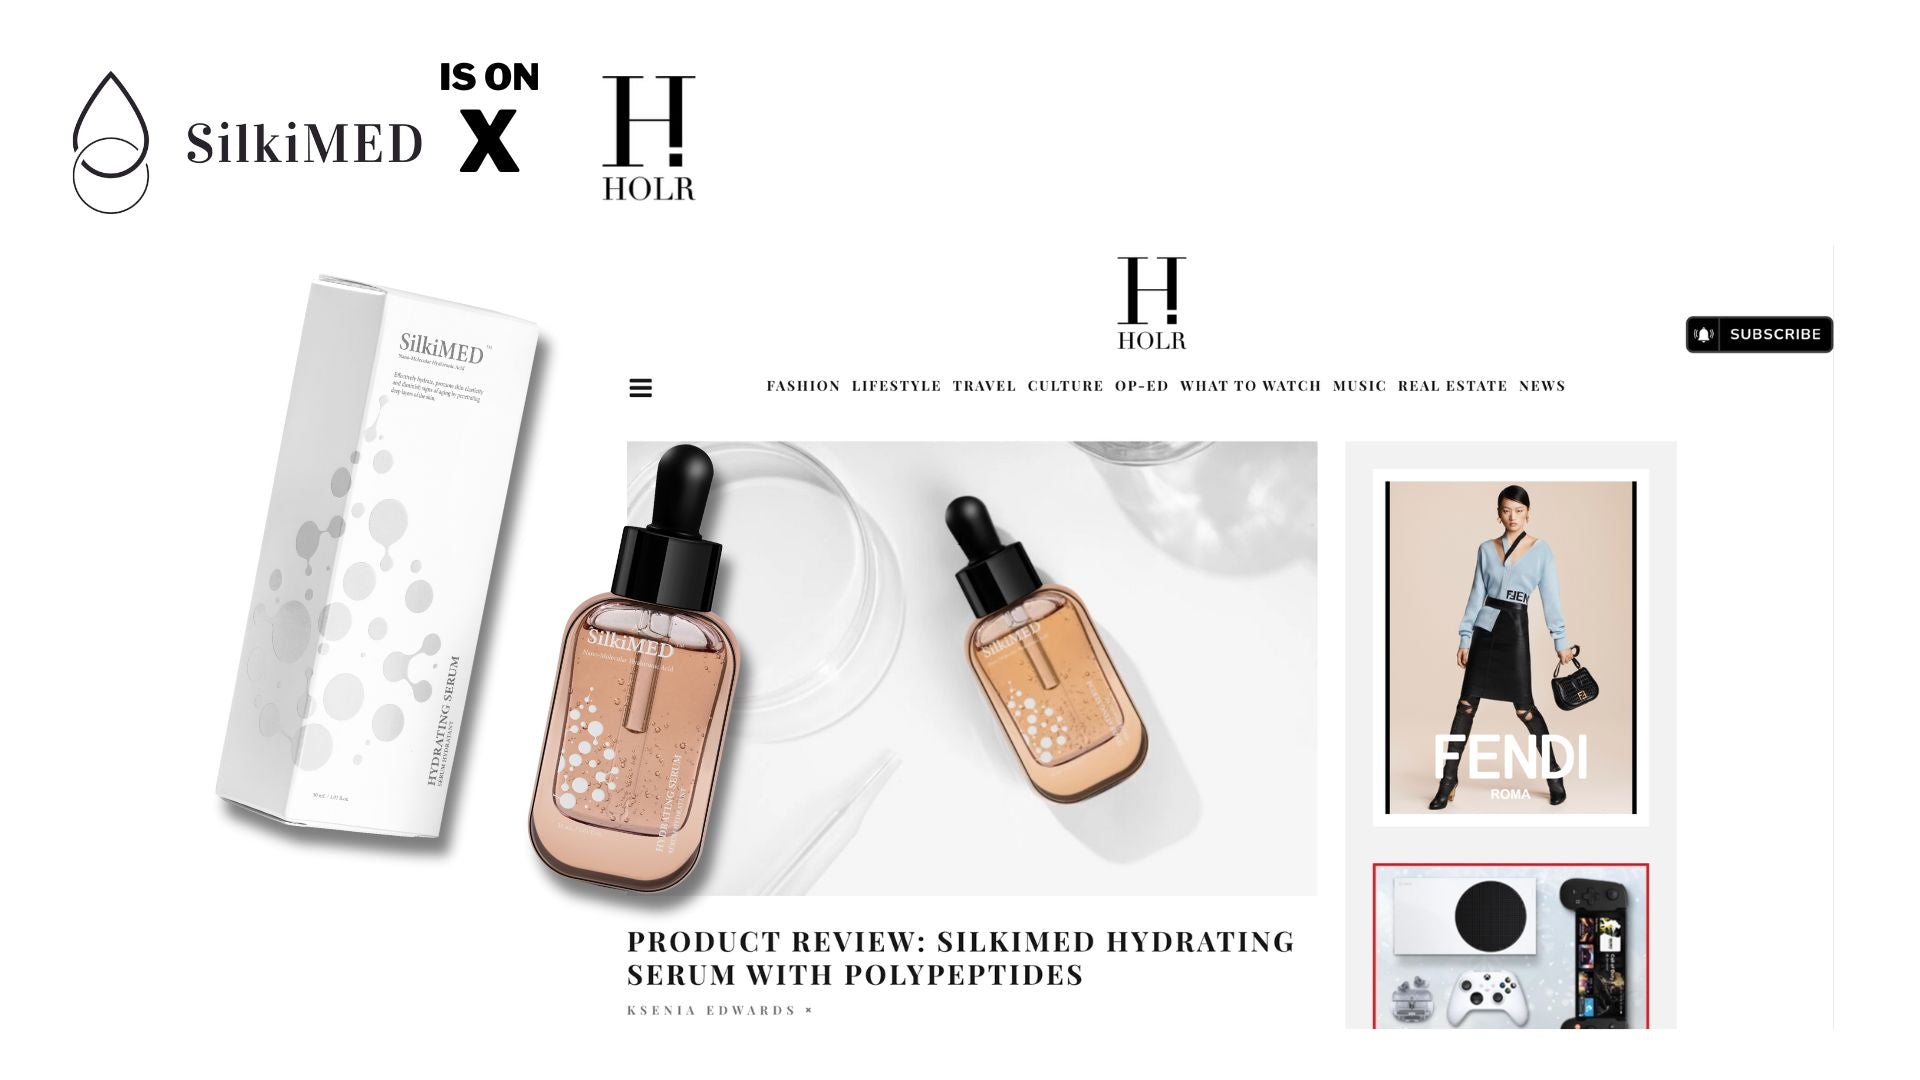 Holr Magazine - SilkiMED Product Review: Hydrating Serum with Polypeptides